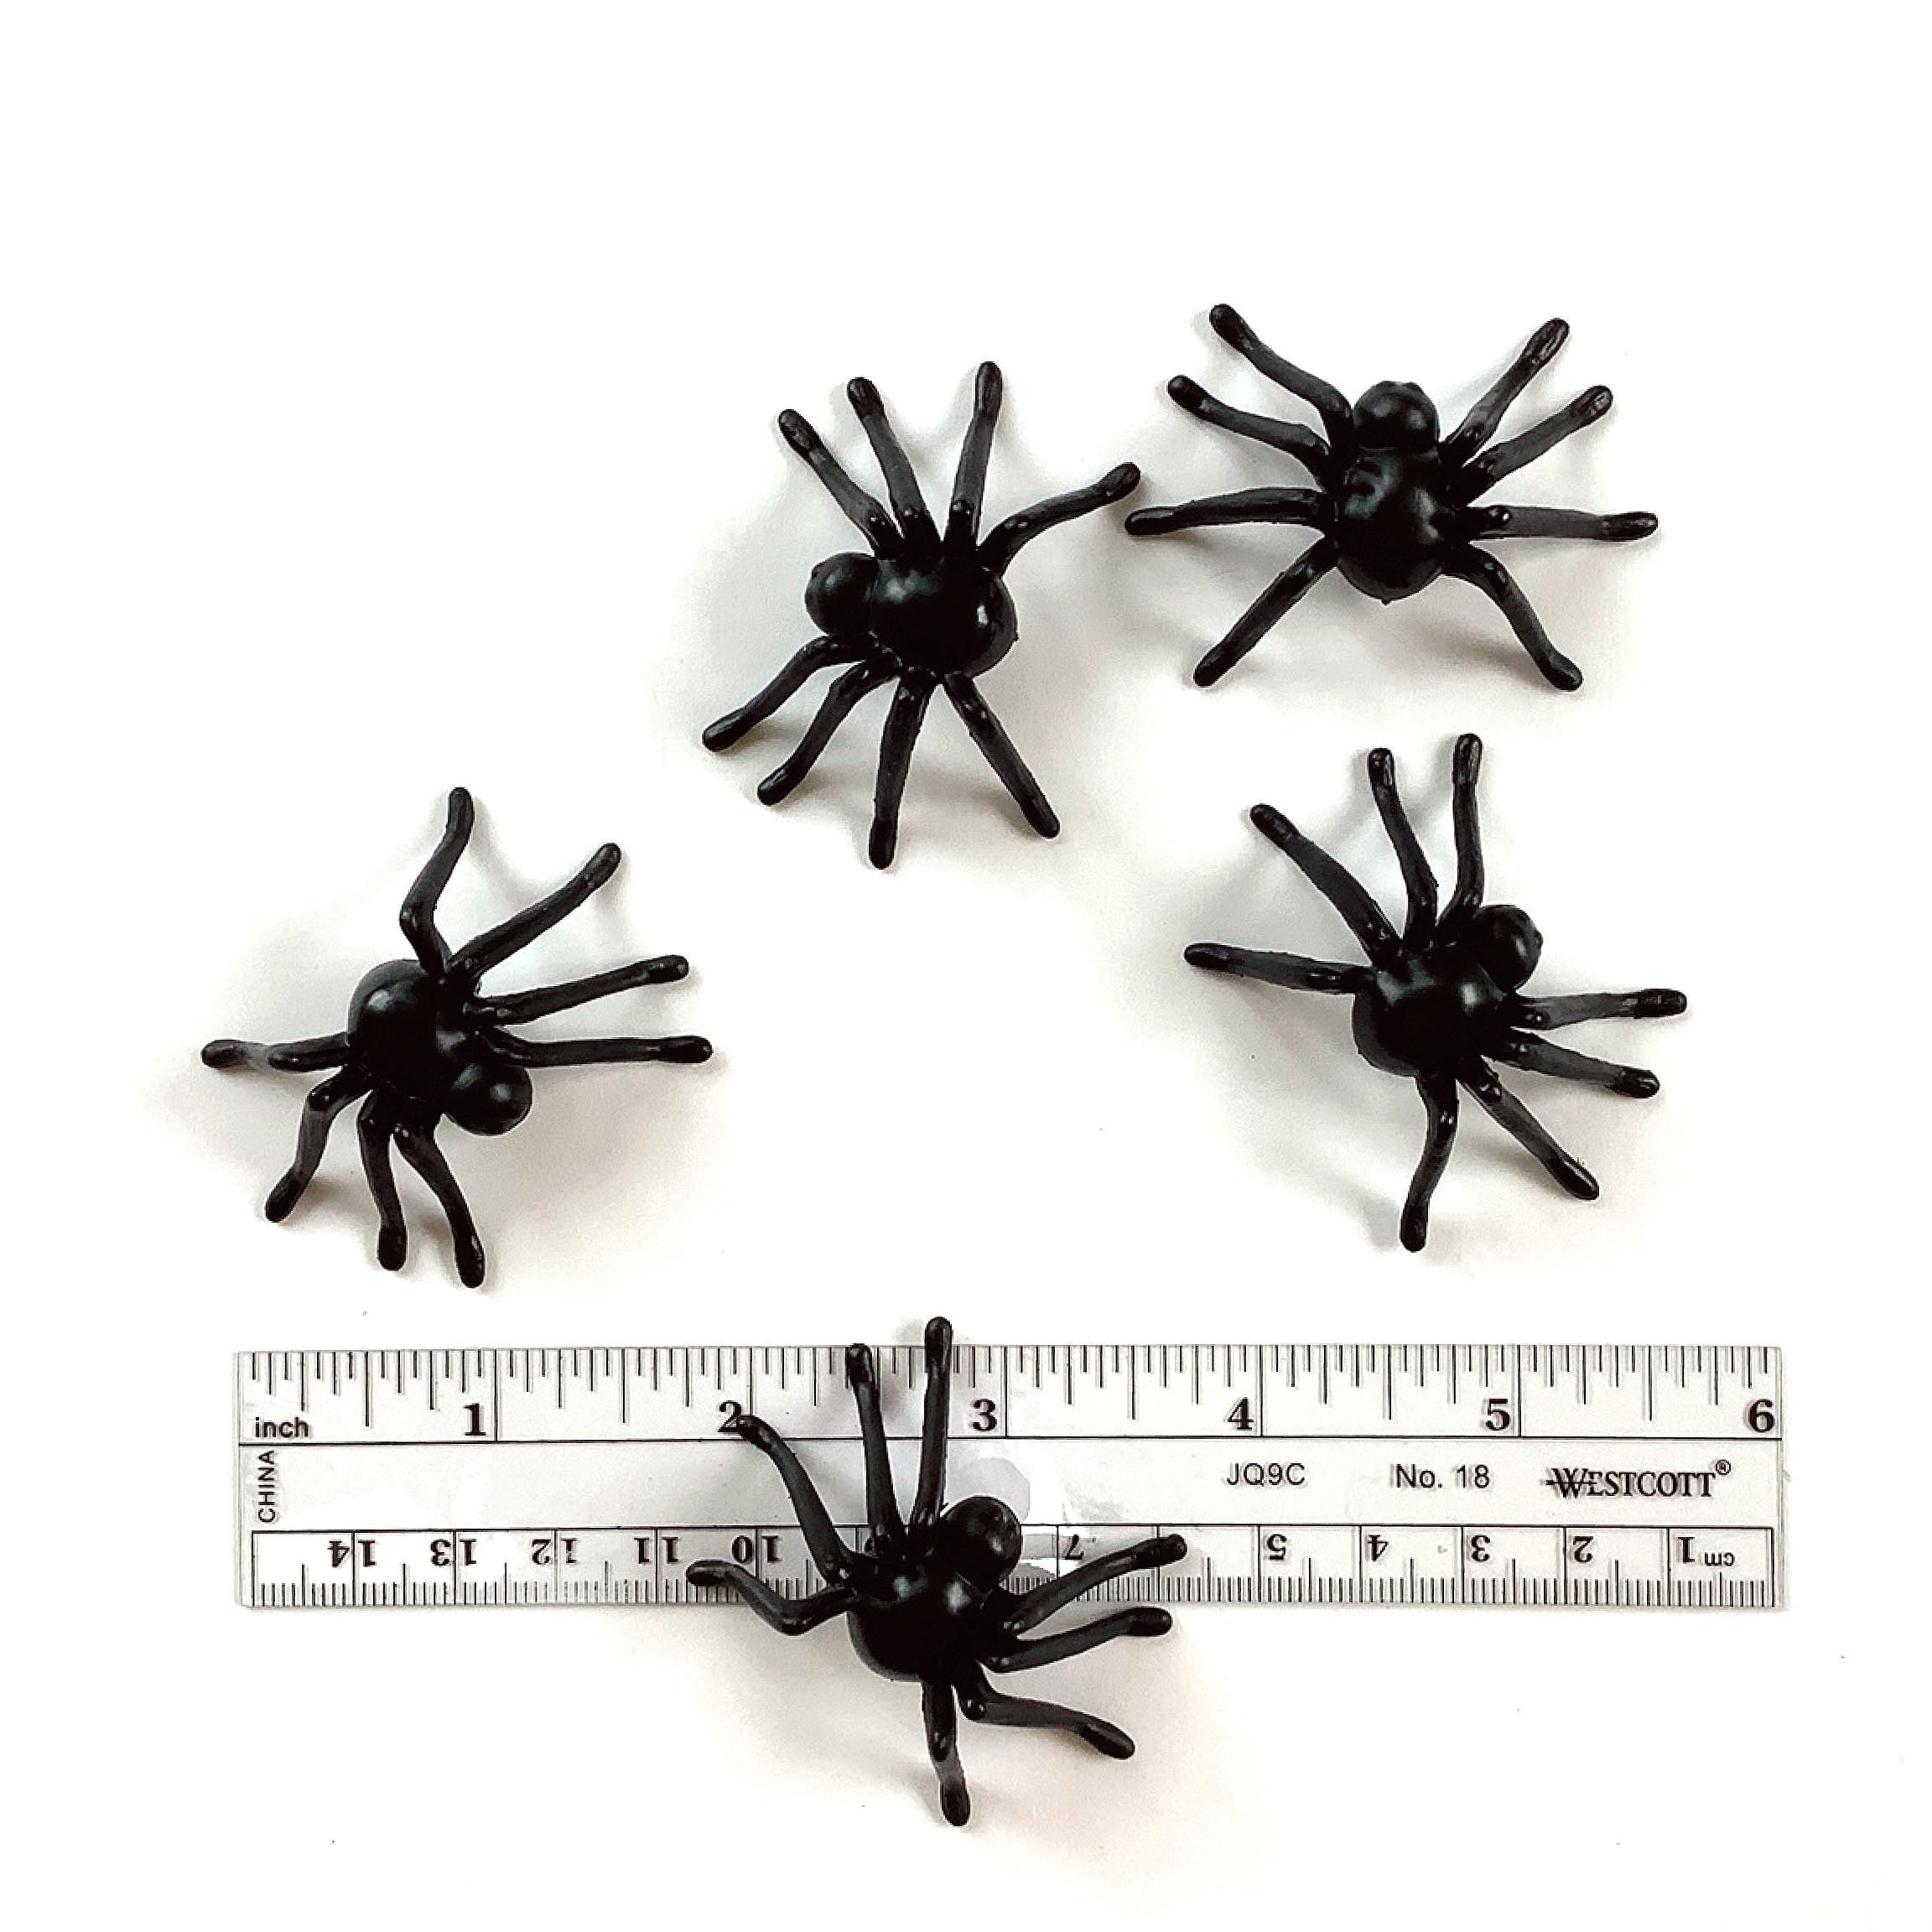 5 x Halloween Spiders Party Decorations Favours Trick or Treat Table Decoration 